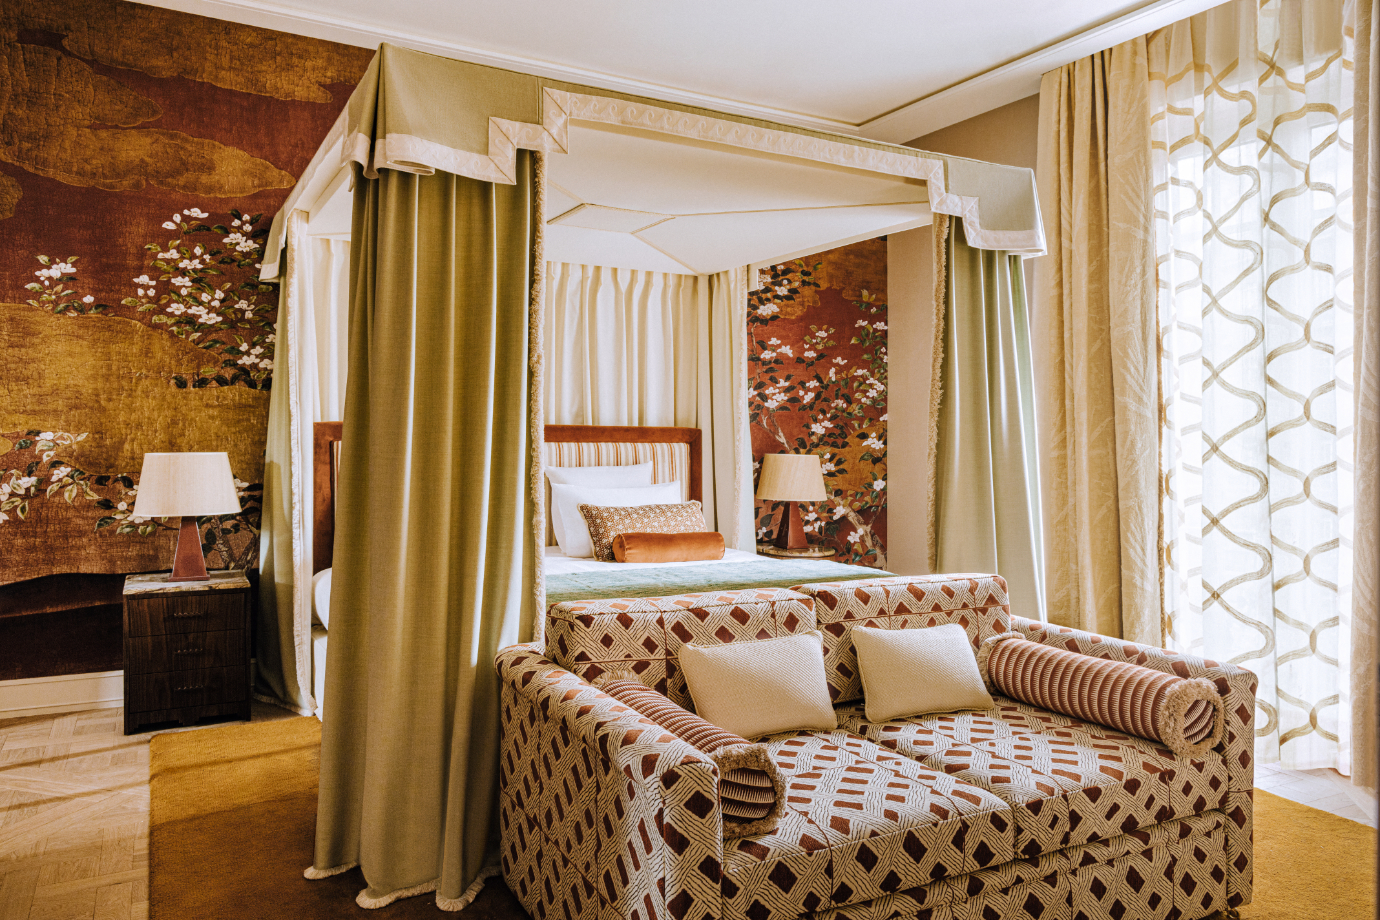 A deluxe room at Saint James Paris featuring a pea green canopy bed, spice-toned velvet pillows, mid-century modern lamps, rust-colored silk chinoiserie wallpaper, a burgundy and cream patterned loveseat and floor to ceiling windows